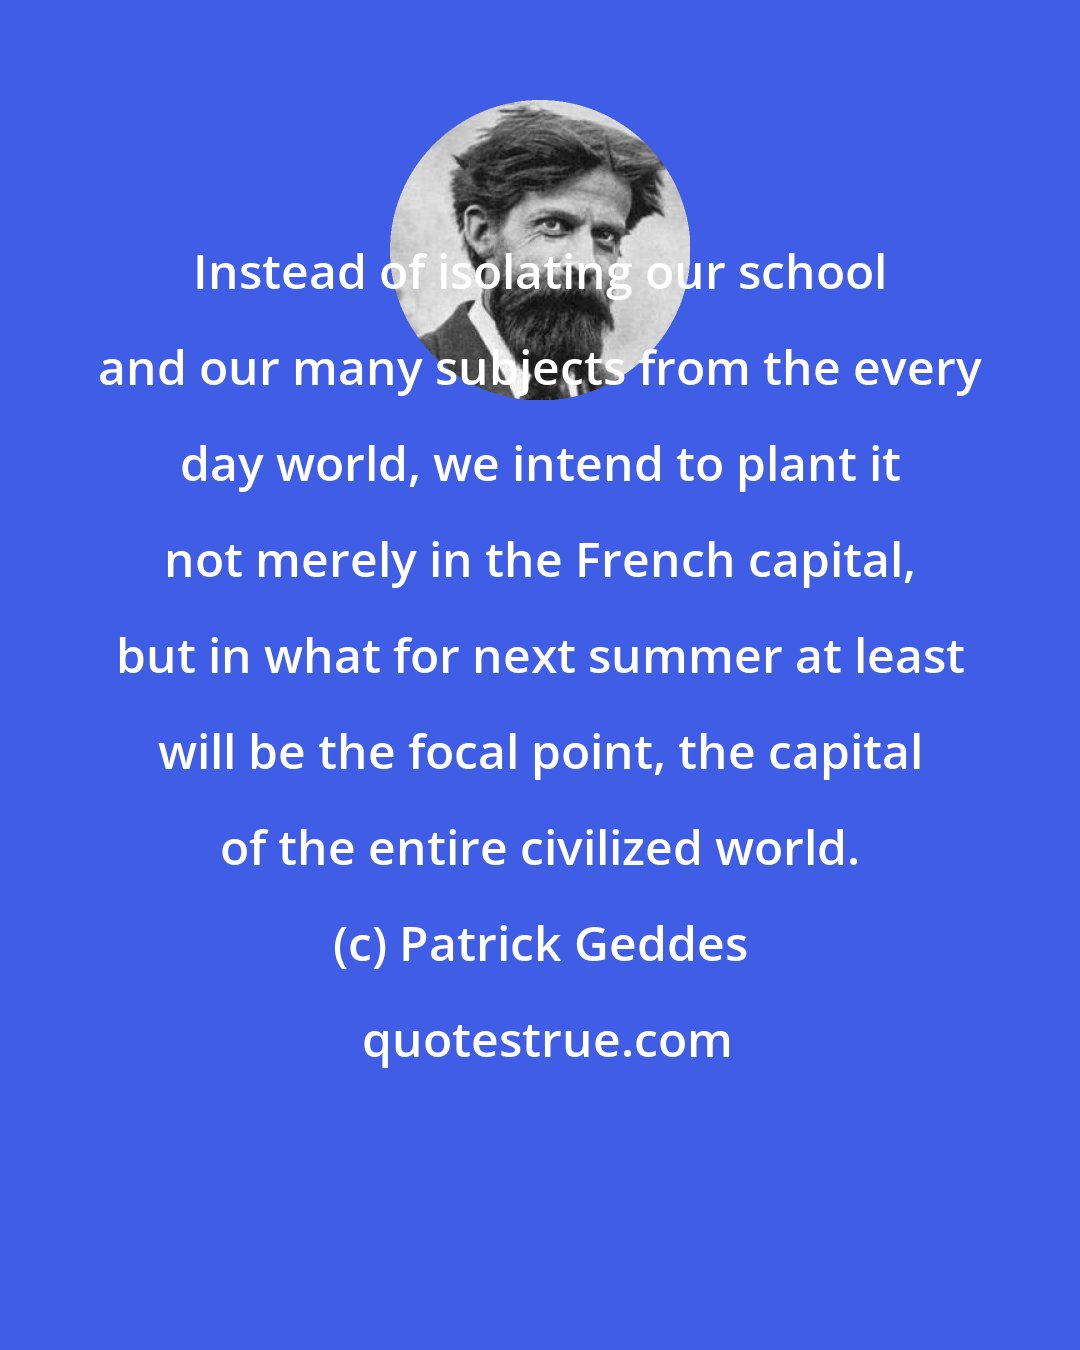 Patrick Geddes: Instead of isolating our school and our many subjects from the every day world, we intend to plant it not merely in the French capital, but in what for next summer at least will be the focal point, the capital of the entire civilized world.